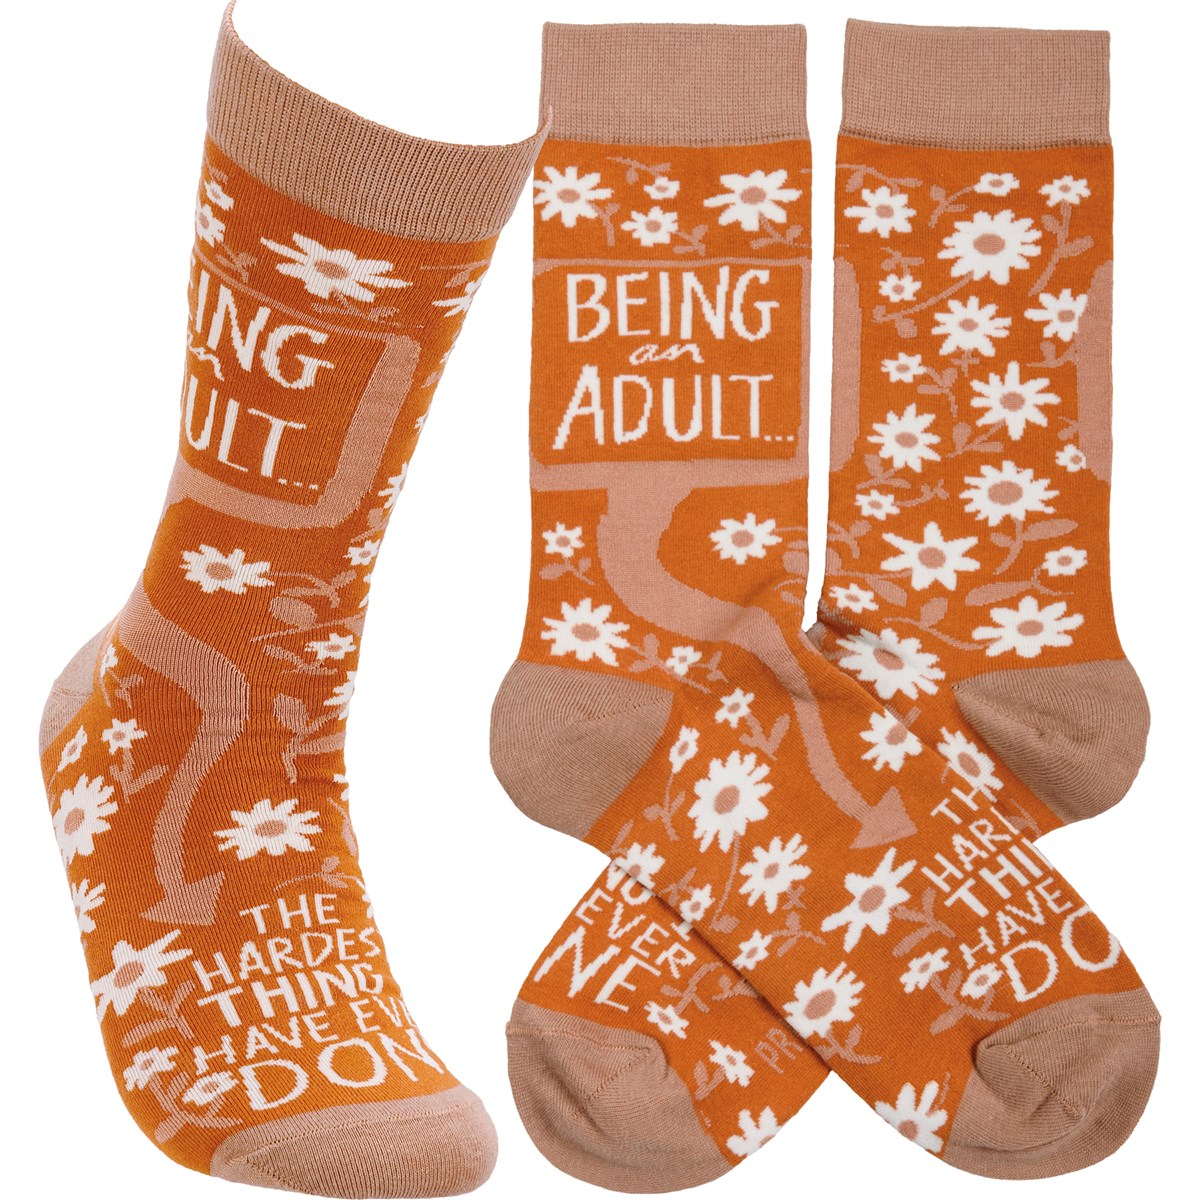 Being An Adult Hardest Thing I Have Done Socks - Cotton, Nylon, Spandex